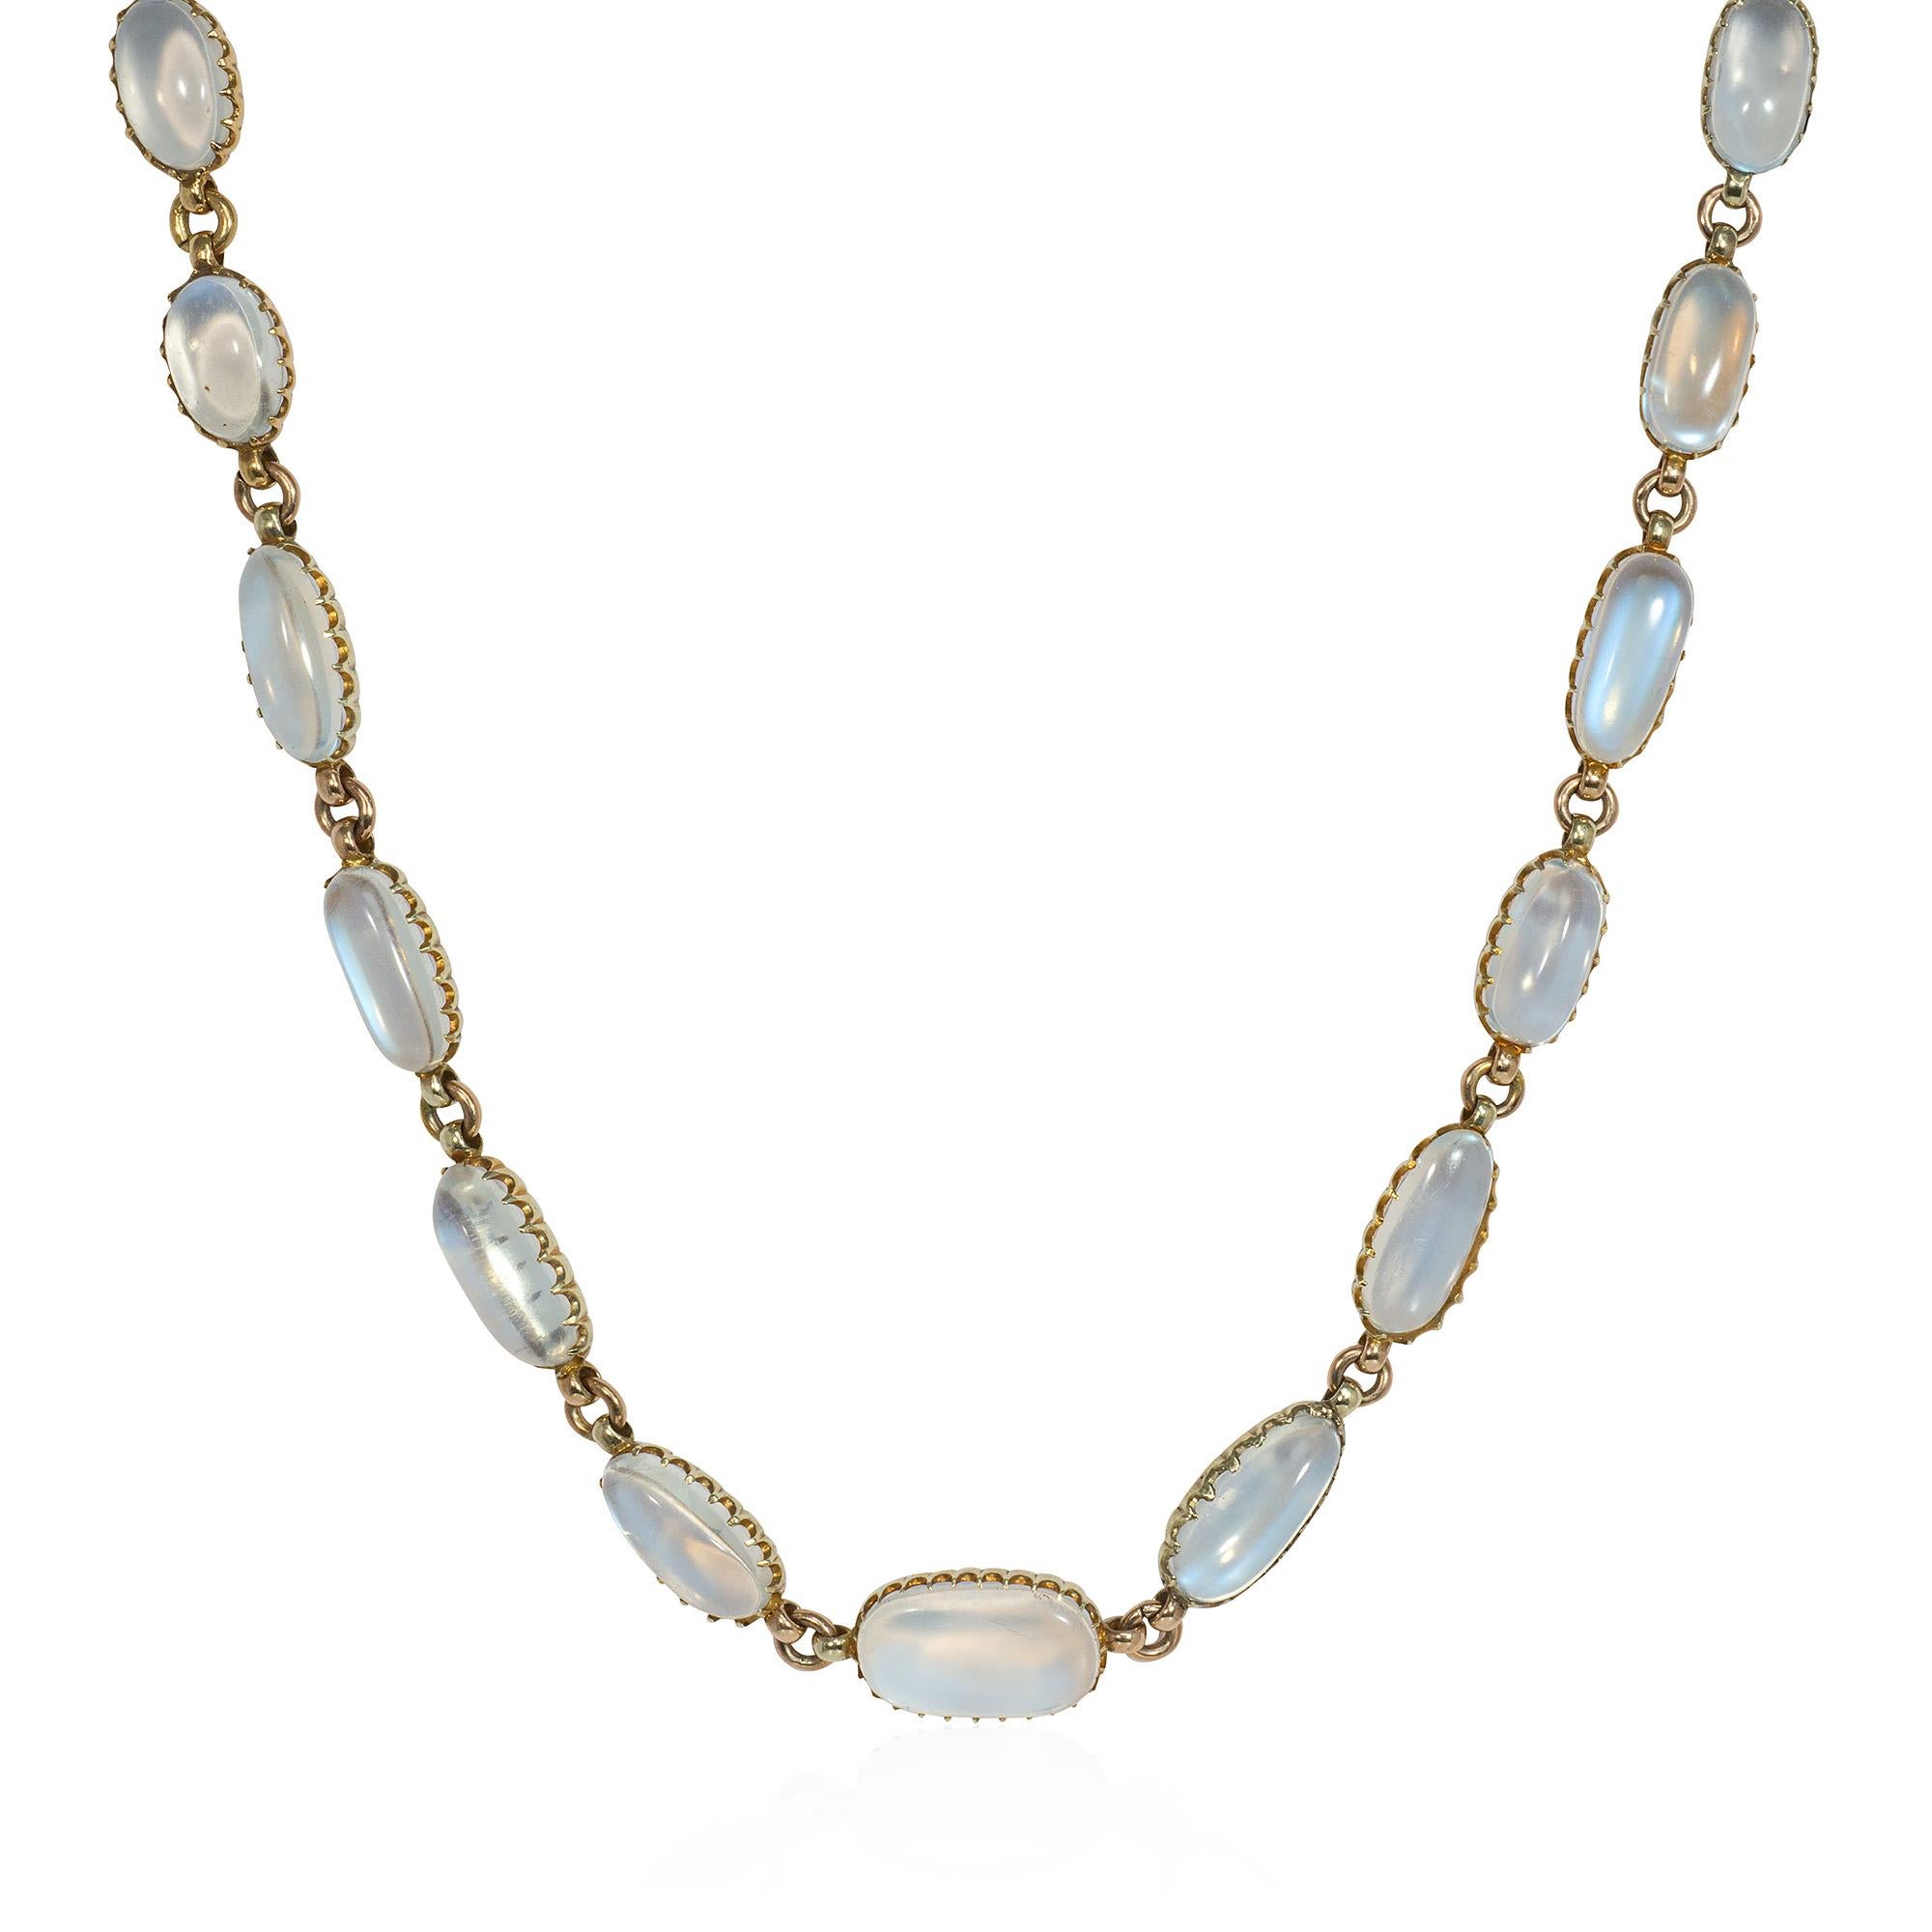 A gold and moonstone antique style rivière necklace comprised of graduated oblong cabochon moonstones in claw settings, in 14k.